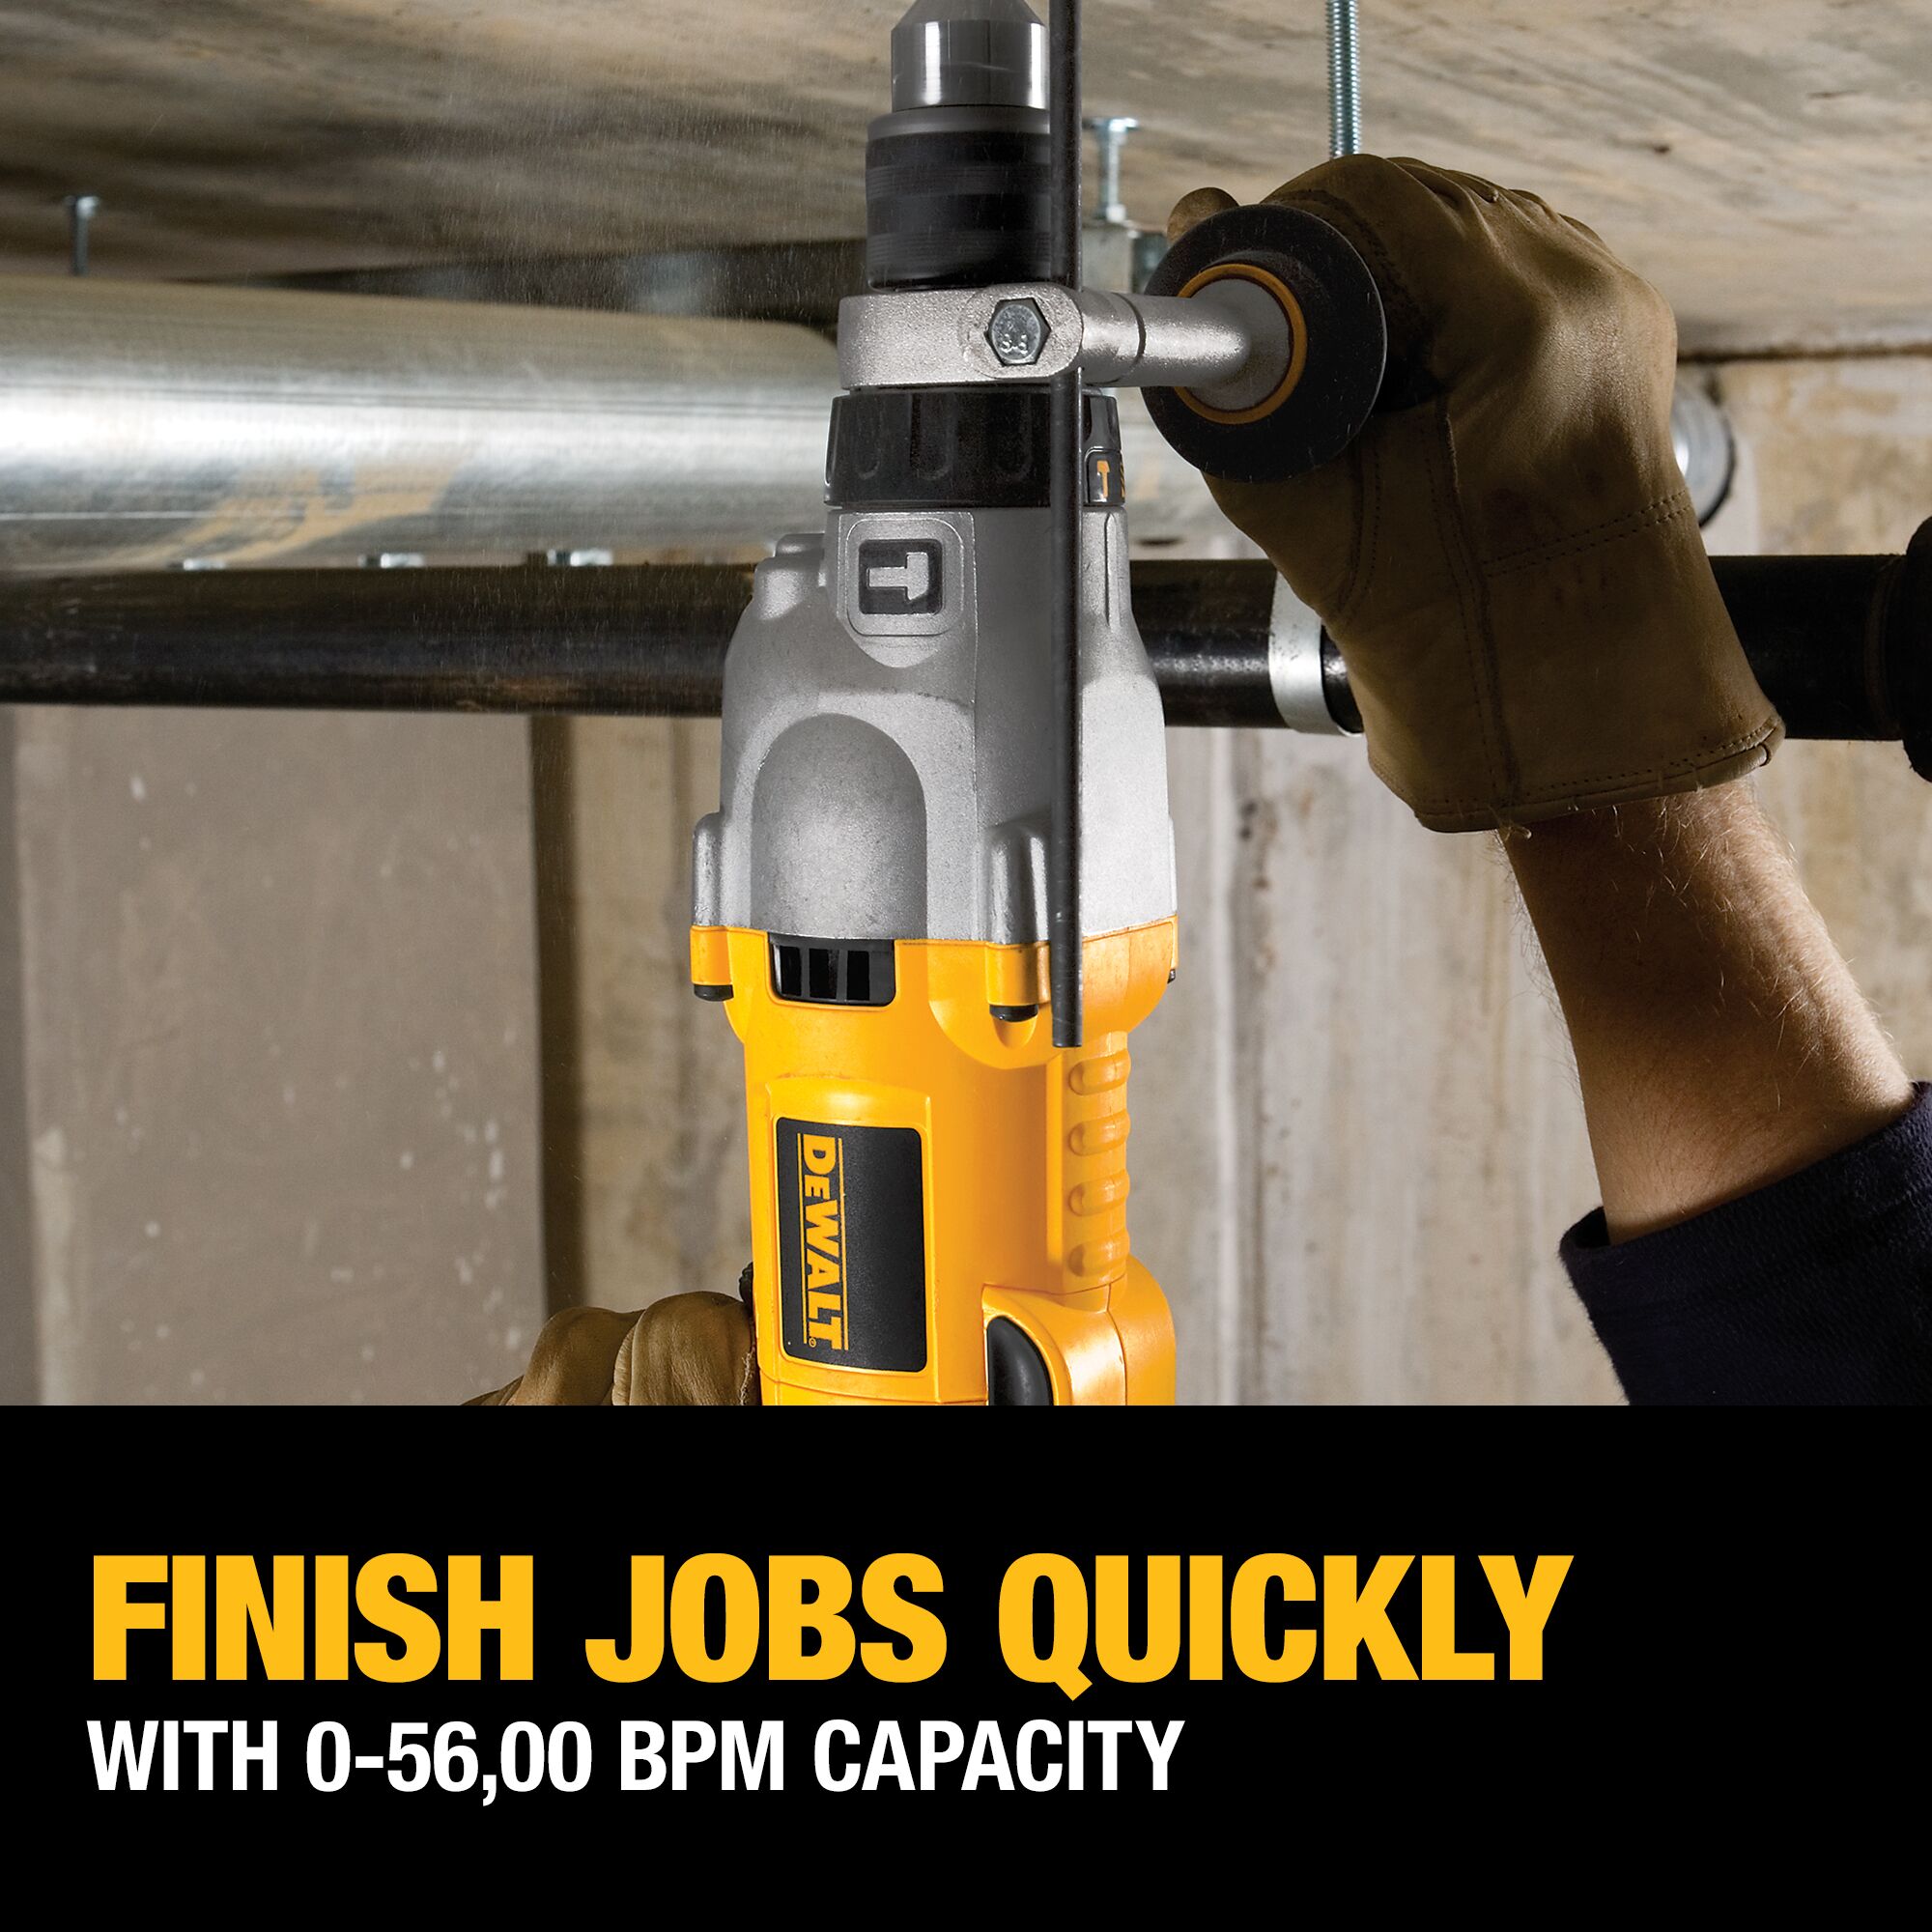 DEWALT 1/2-in Variable Speed Corded Drill in the Hammer Drills department at Lowes.com